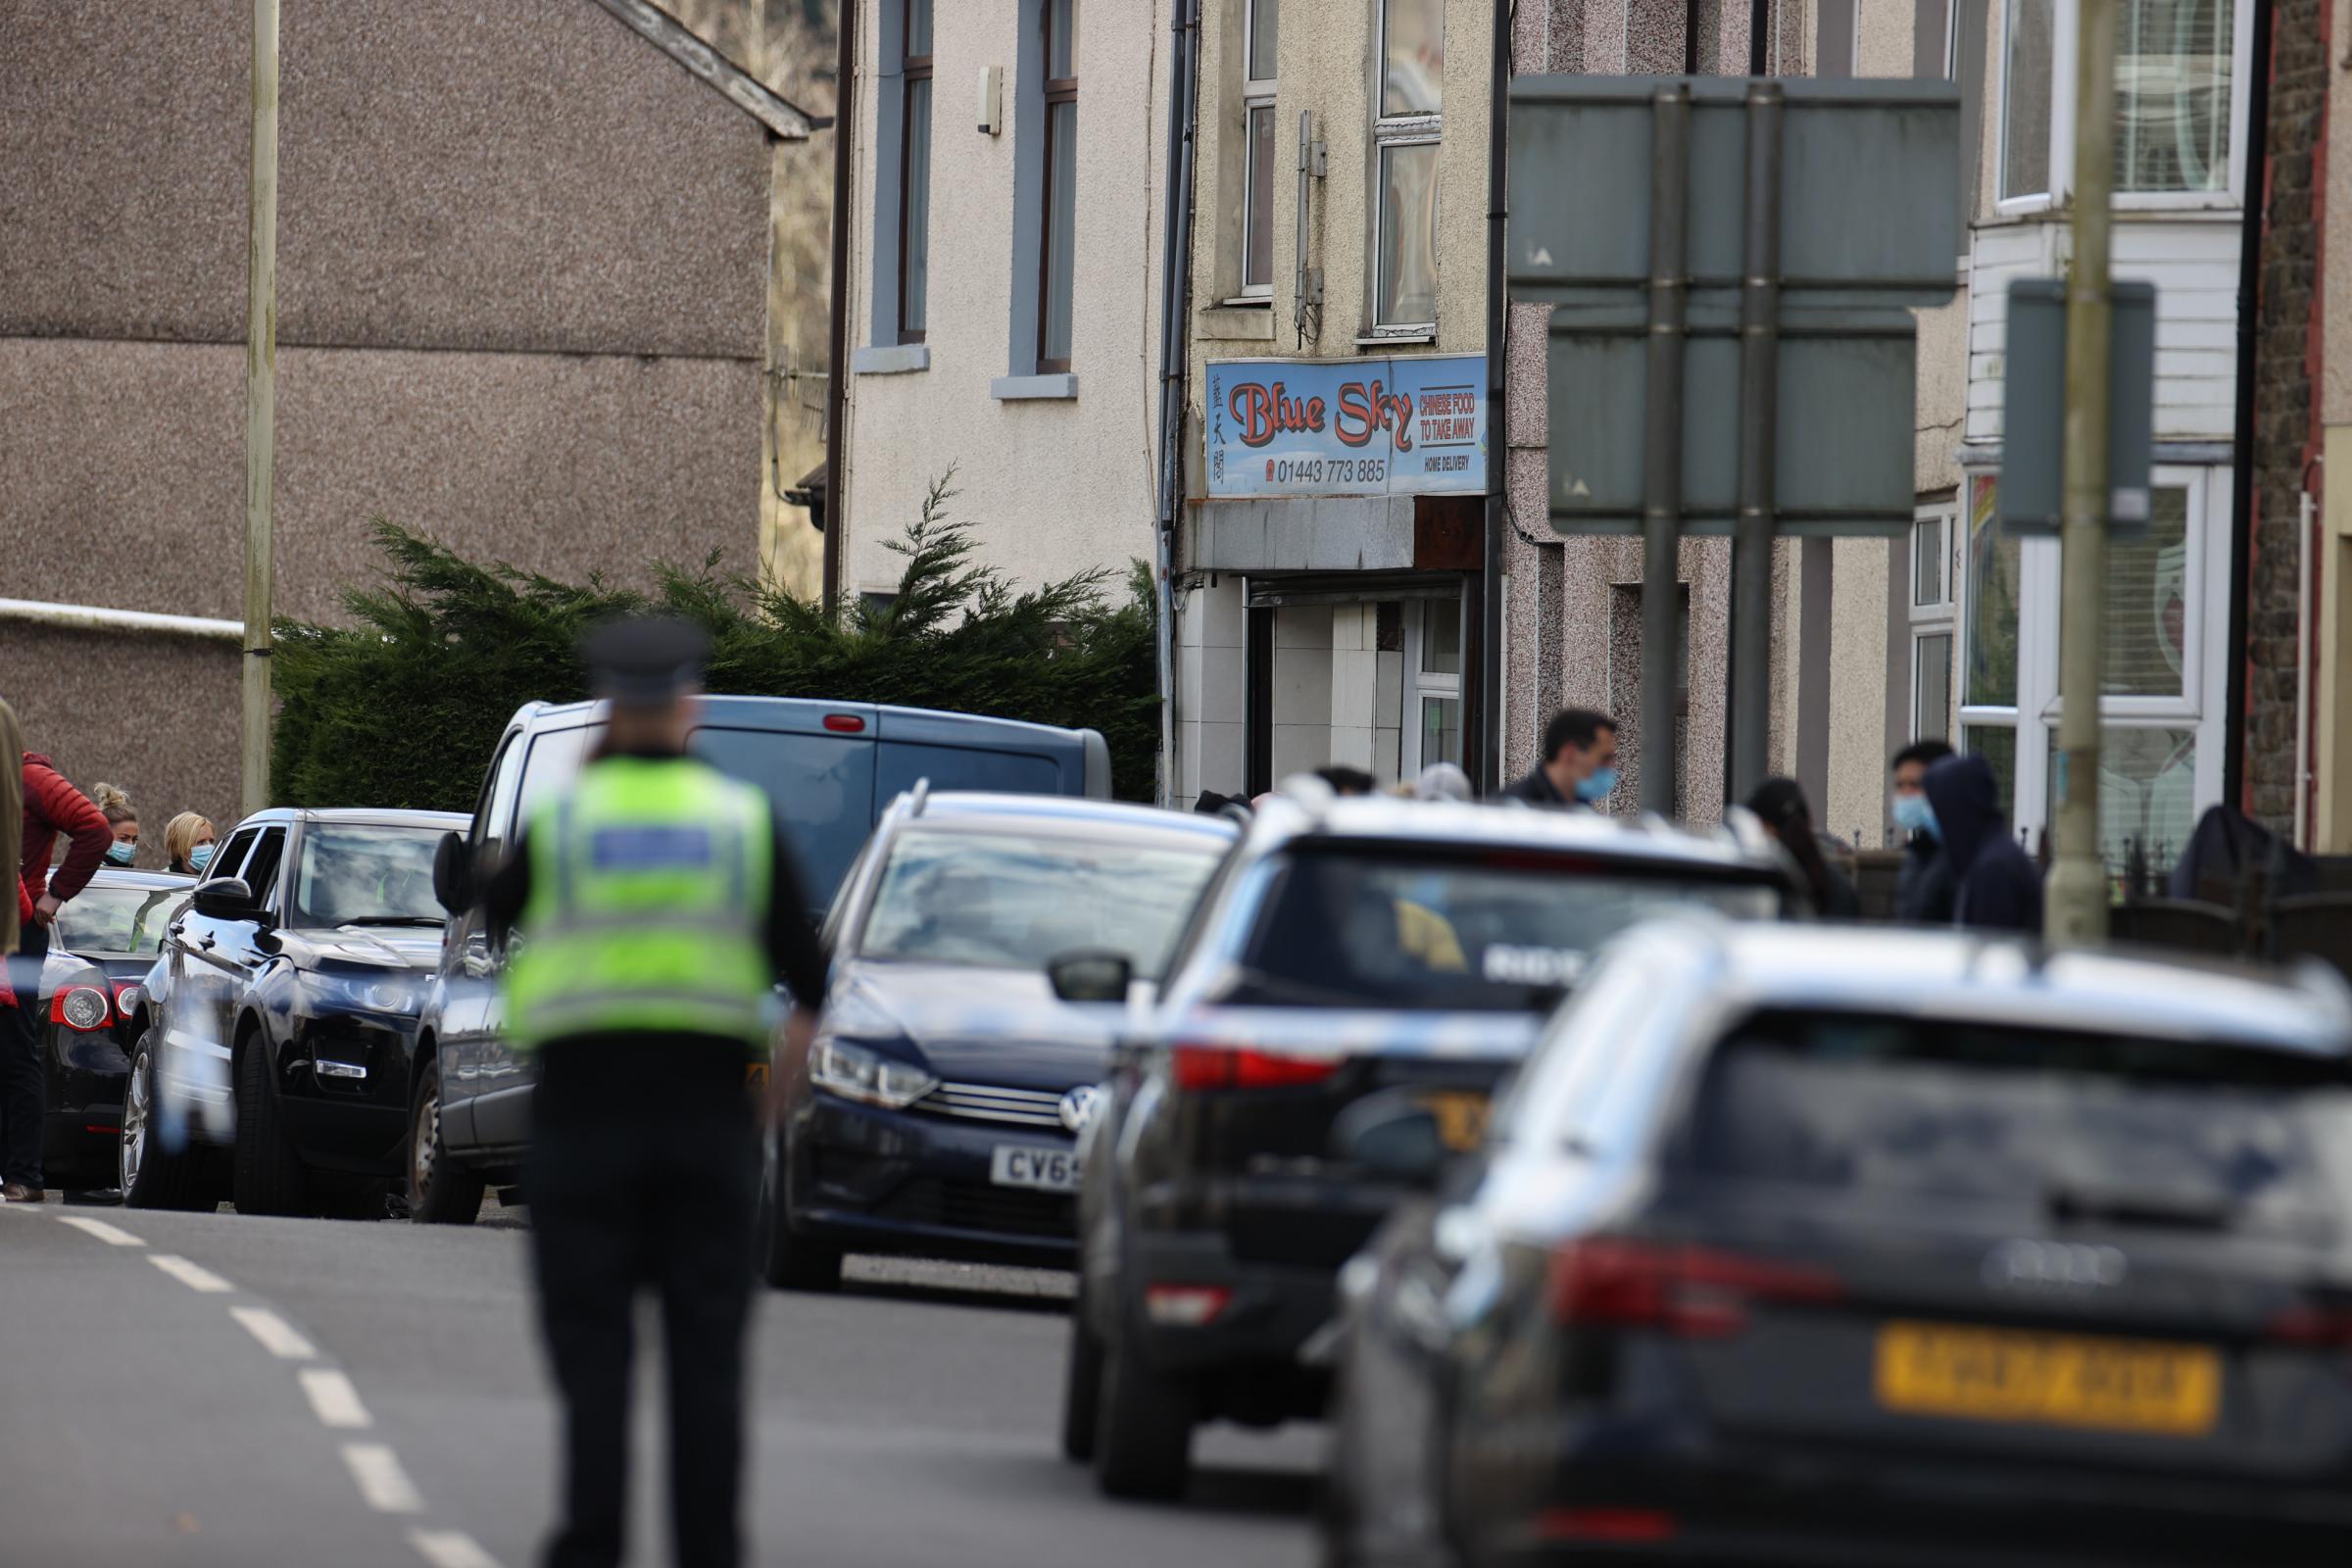 05.03.21 Police Incident, Rhonnda -The police cordon off an area at the scene of serious incident involving a number of casualties outside the Blue Sky takeaway on Baglan Street in Treorchy, Rhondda, South Wales. Huw Evans Picture Agency